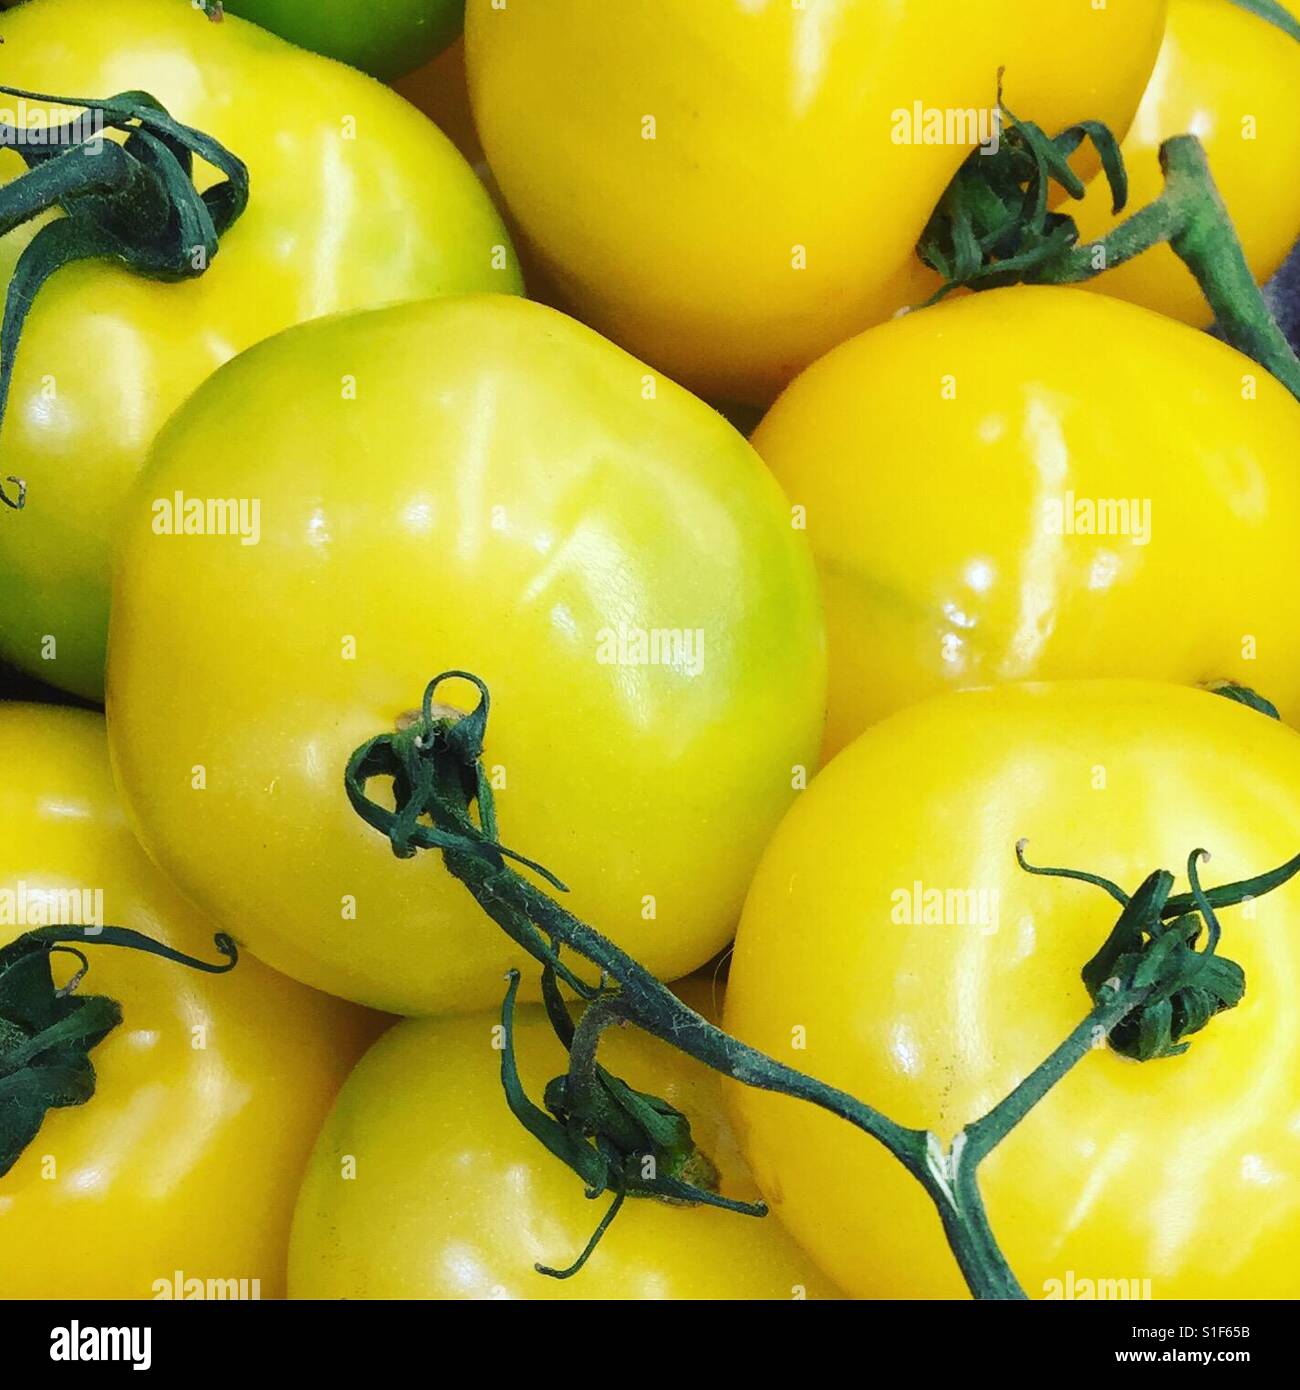 Yellow tomatoes by K.R. Stock Photo